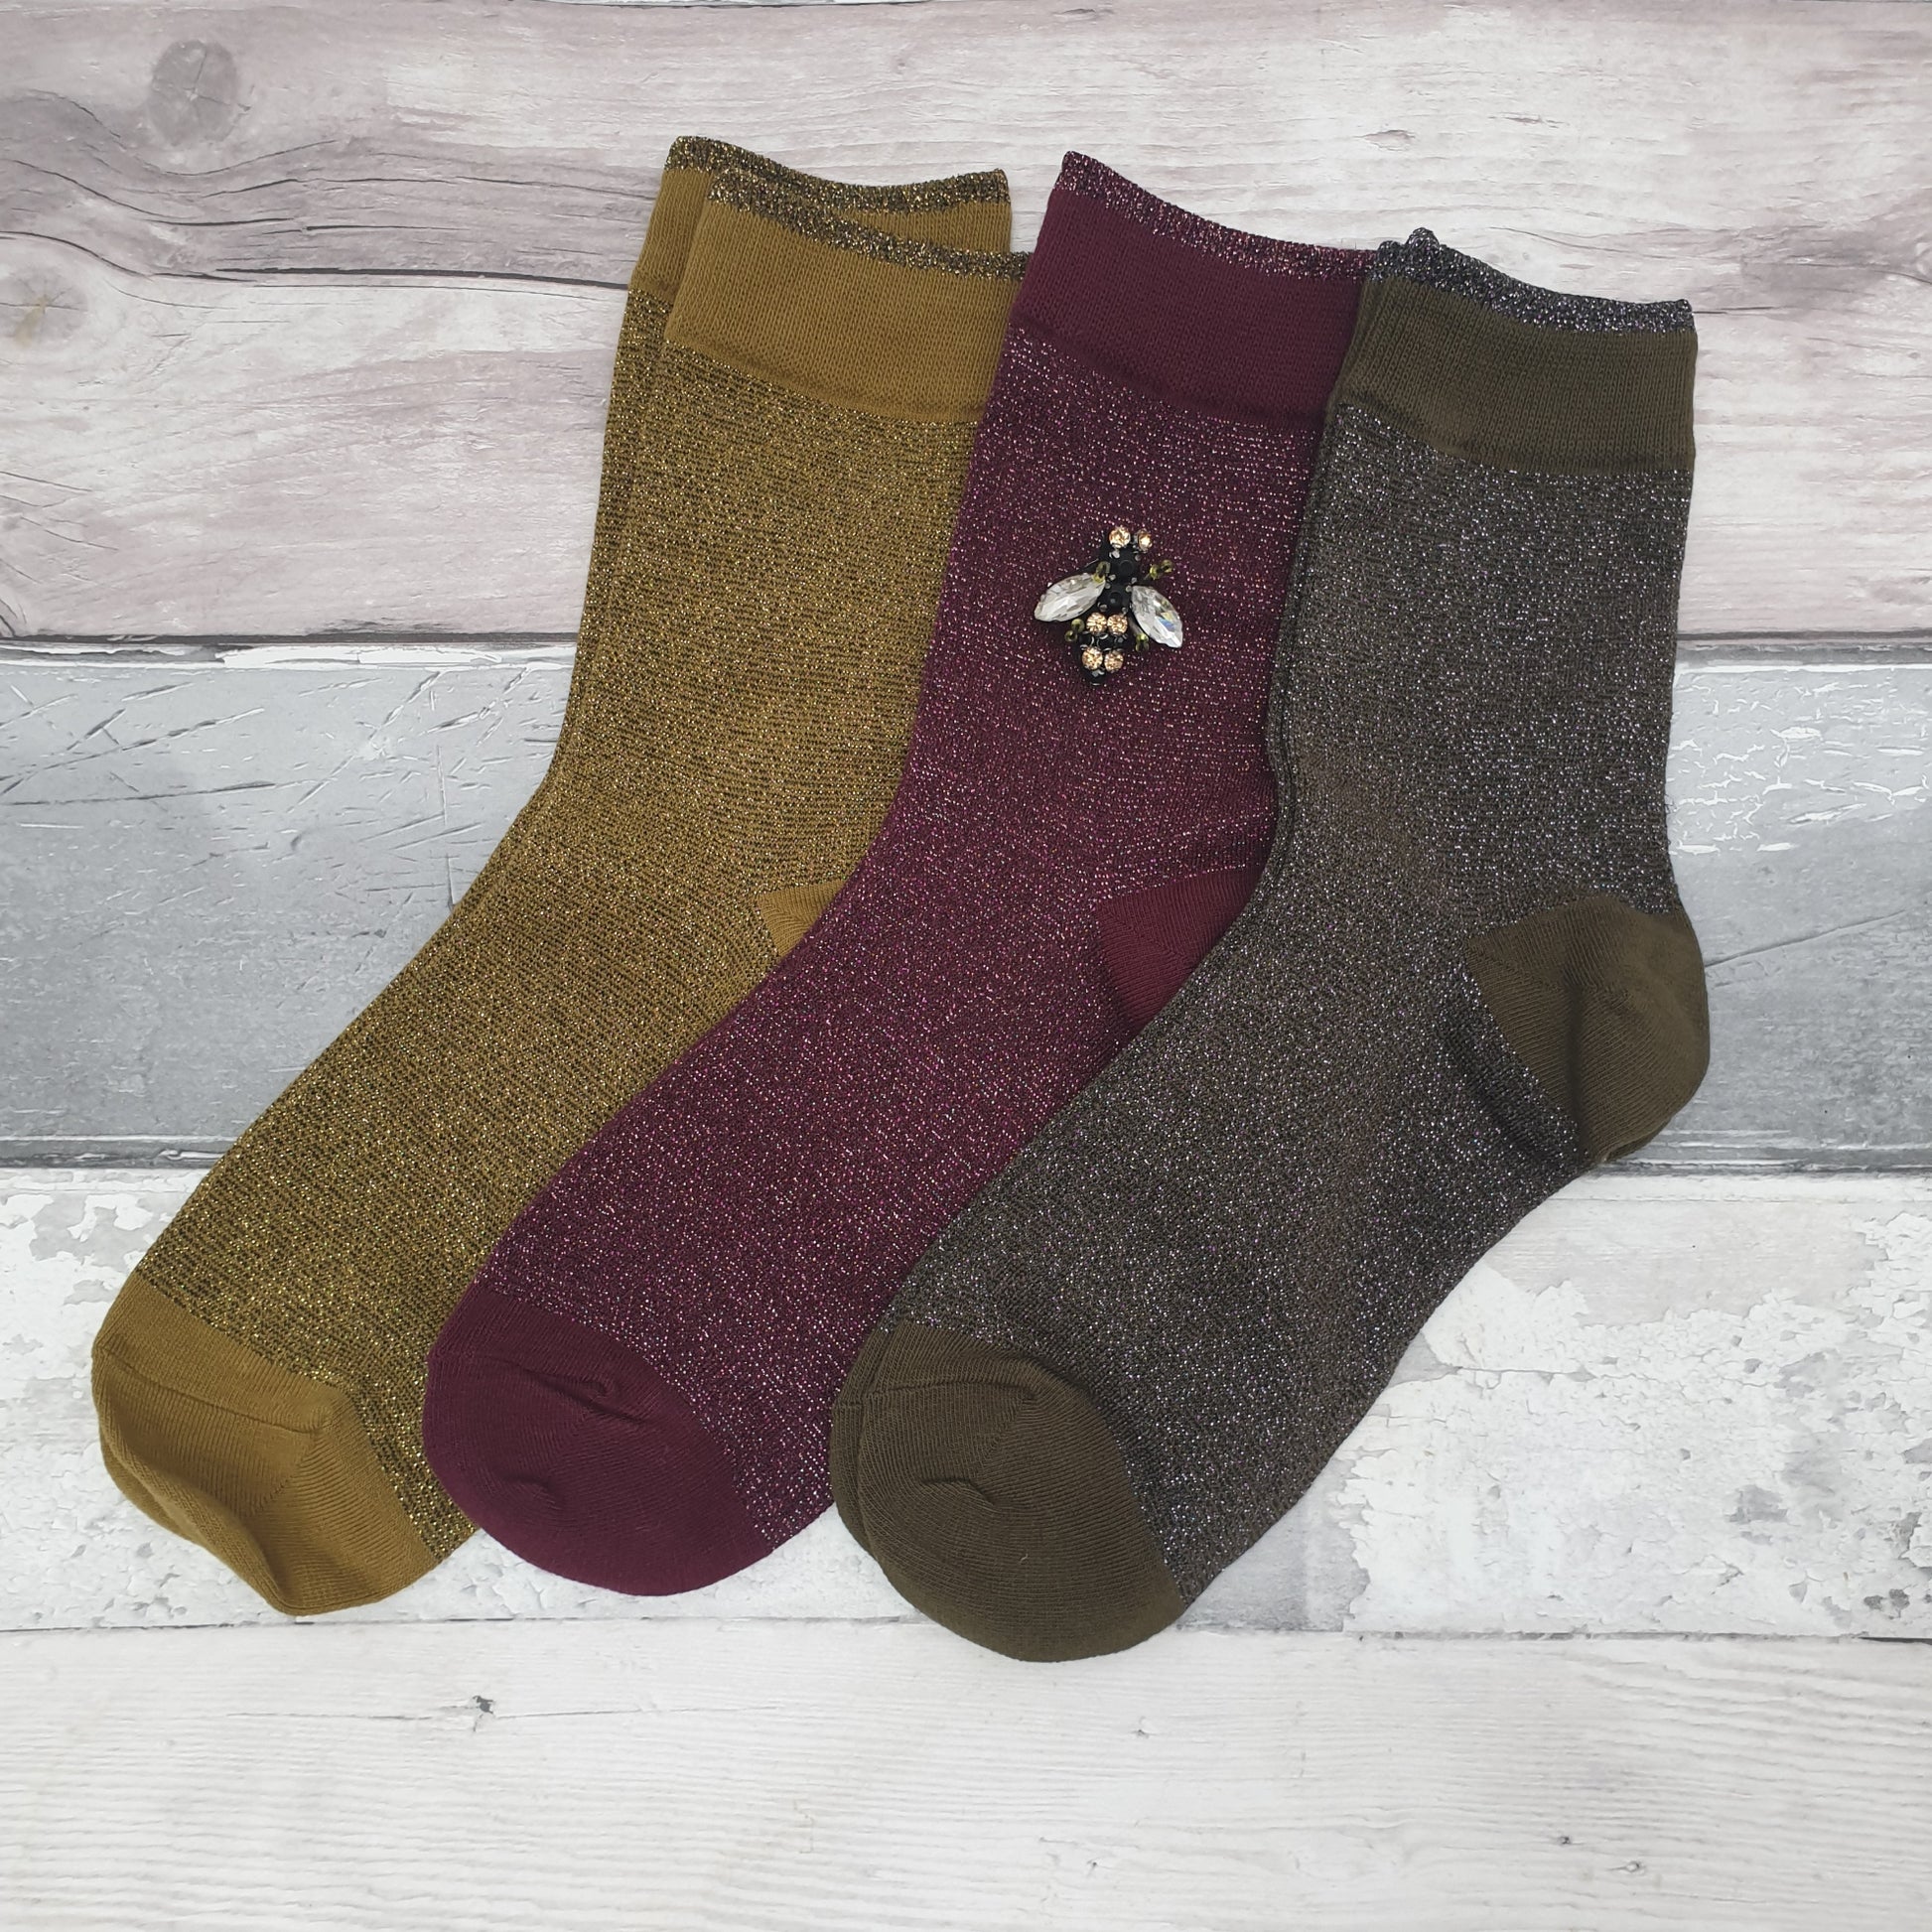 3 Pairs of sparkly socks in Olive, Burgundy and Pewter. Bee Brooch made from recycled Glass.